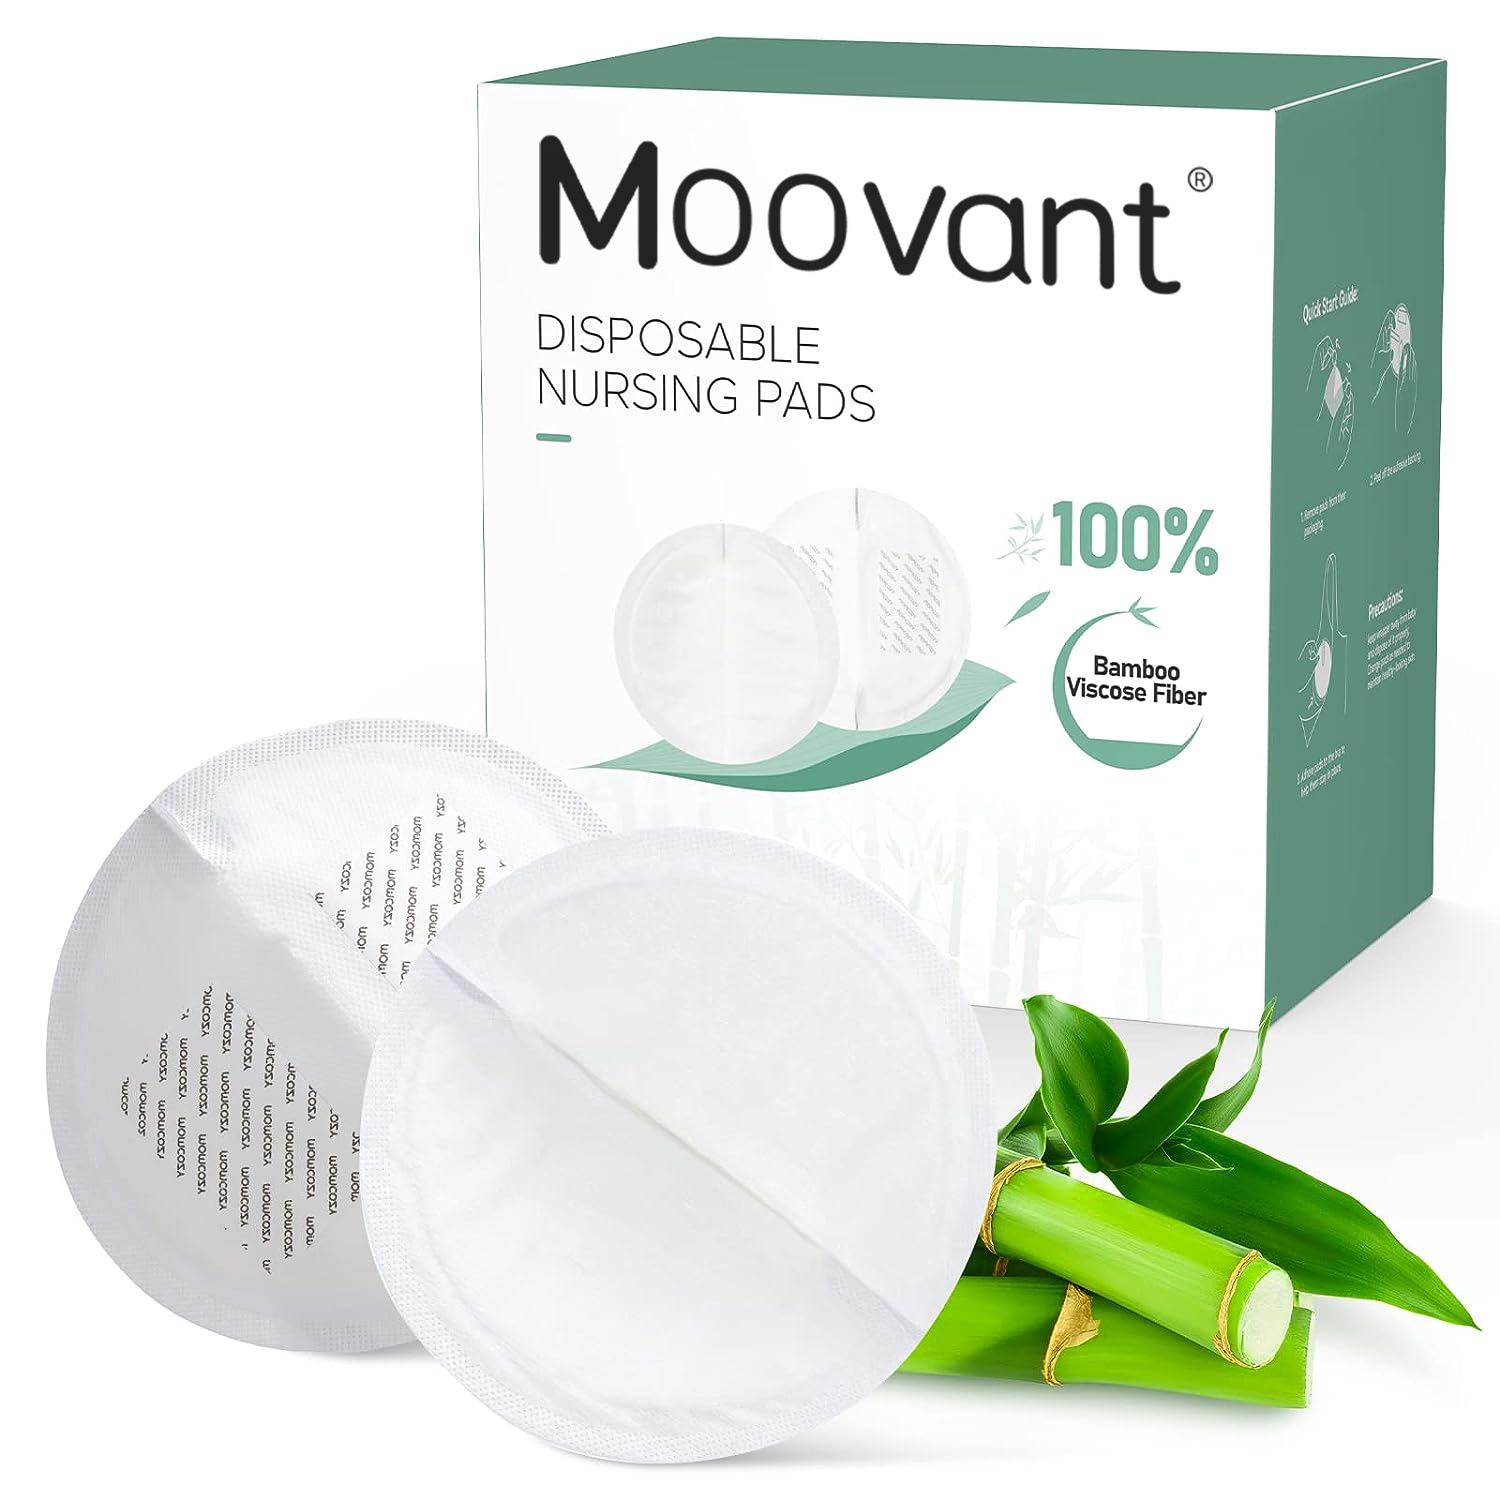 Moovant Bamboo Fiber Disposable Nursing Pads, Made of 100% Bamboo Fiber,  100% Biodegradable, Reduce Carbon Emissions, for Sensitive Skin,  Individually Packaged（120 Count）